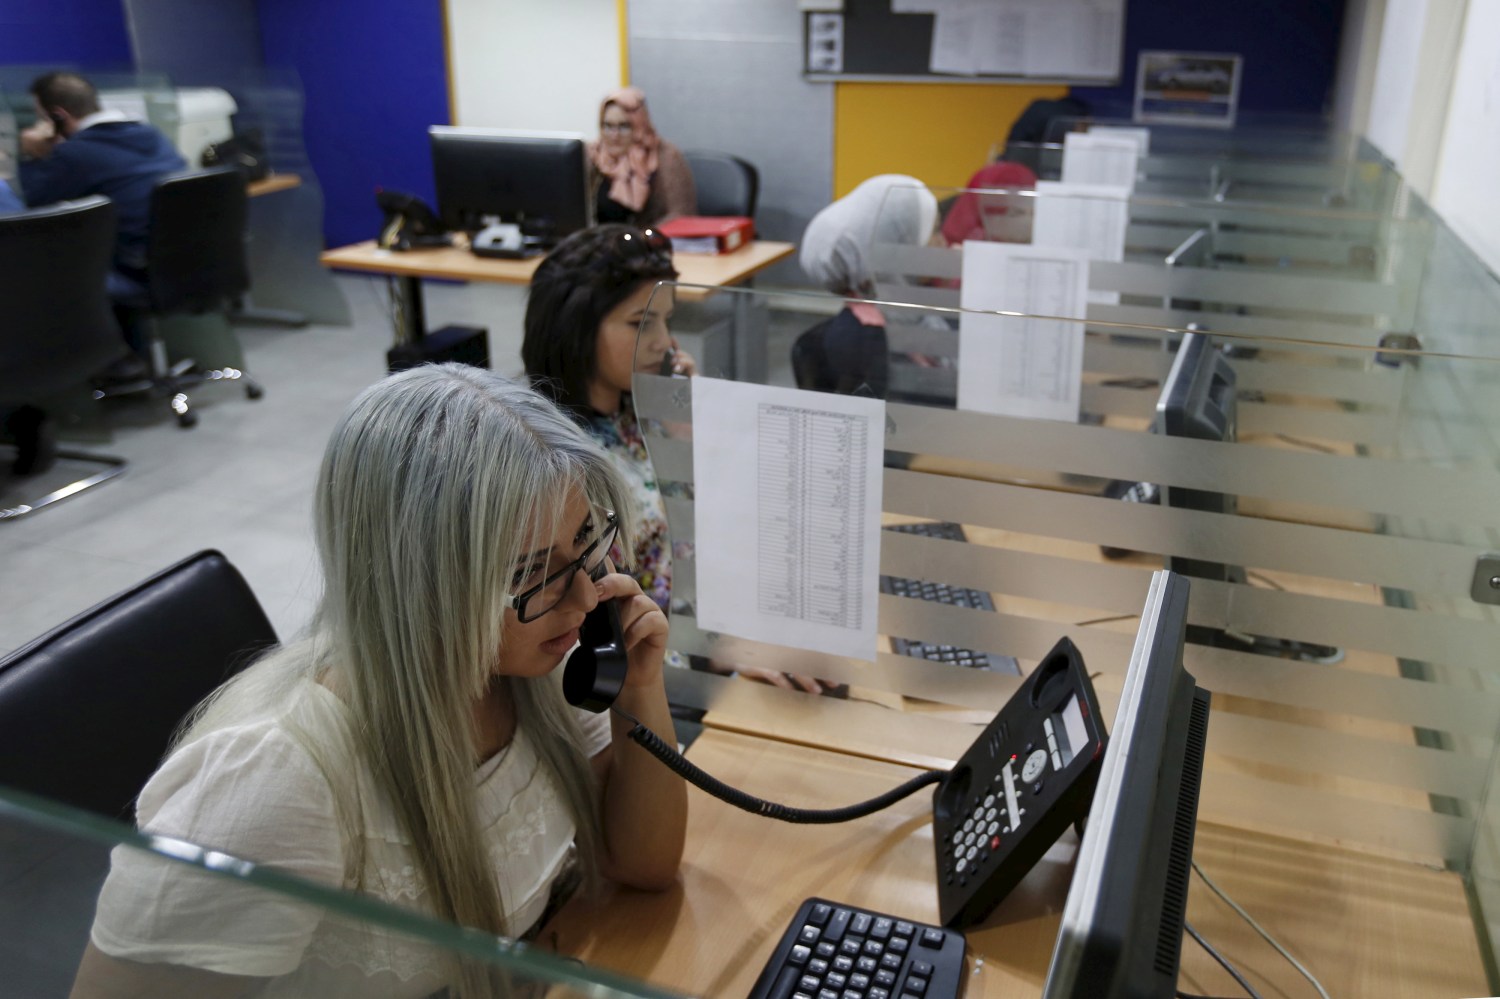 Call centre workers receive calls from female customers for taxi booking jobs at Noor Jordan for Transport  Taxi Moumayaz (Special Taxi) in Amman, Jordan, March 24, 2016. The Jordanian taxi company has launched a new service run only for women, exclusively by women, with 10 women taxi drivers for the first time in Jordan picking up only female passengers and families. The company chairman Abu al-Haj said they plan to hire another 10 women as drivers, and possibly more if the service expands. Picture taken March 24, 2016. REUTERS/Muhammad Hamed